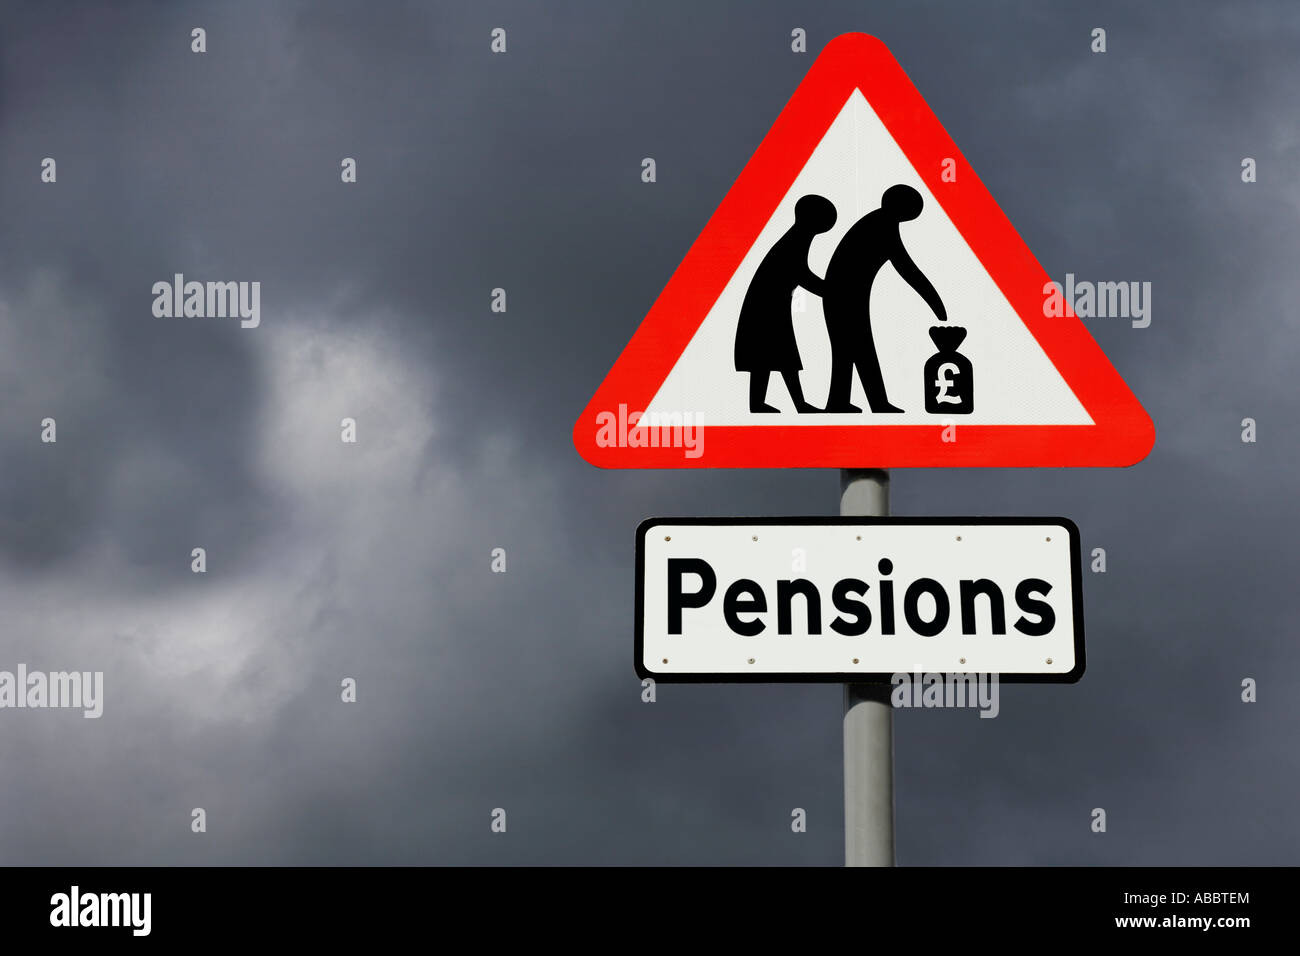 Pensions Road Sign against threatening clouds Stock Photo